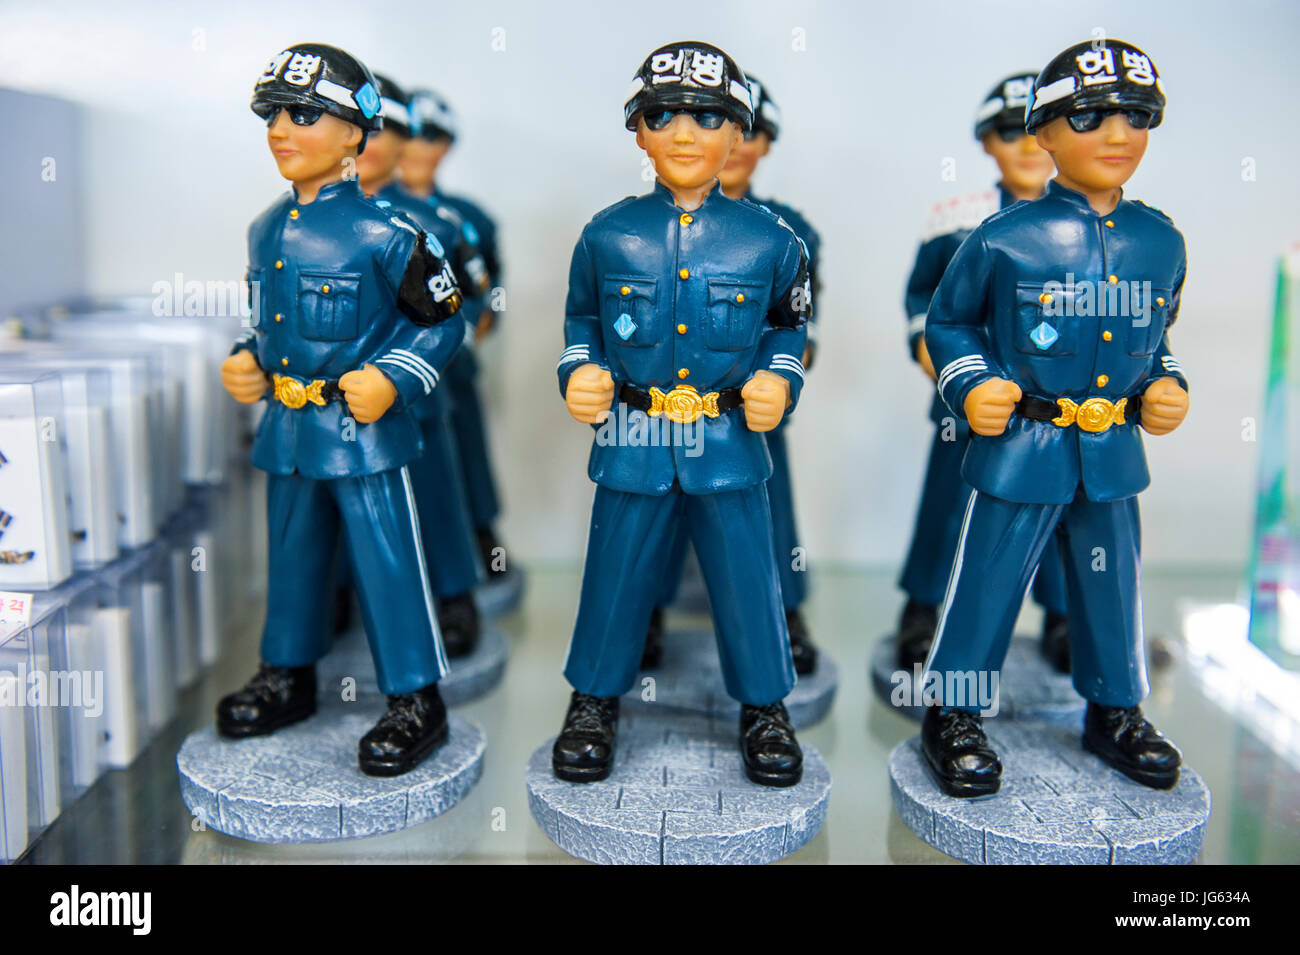 Model soldiers as a souvenir at the high security border between South and North Korea, Panmunjom, South Korea Stock Photo